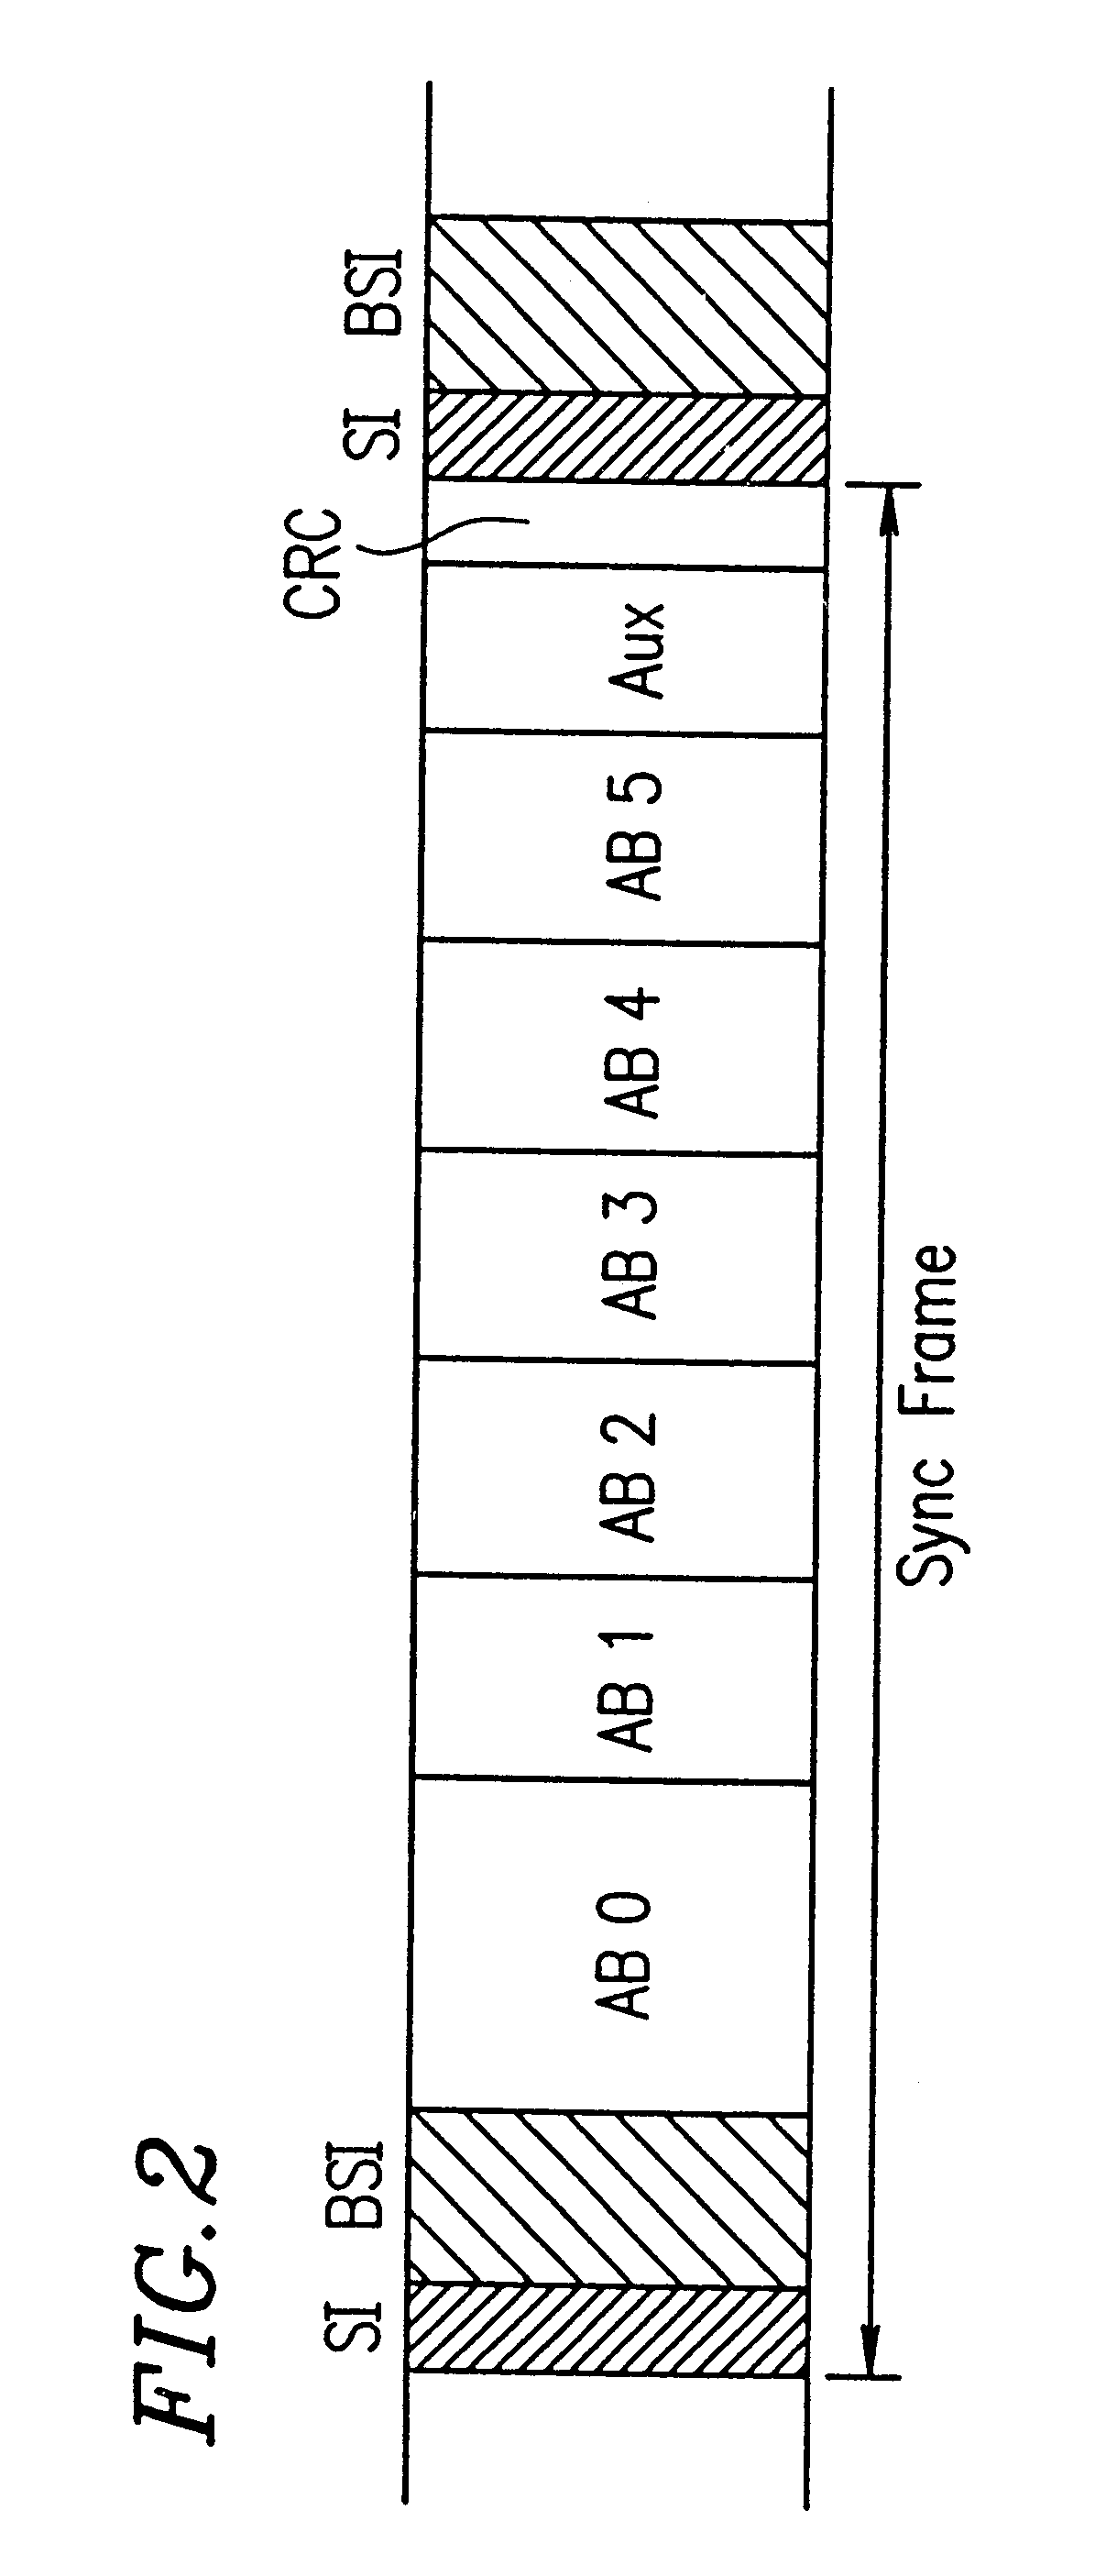 Audio decoding apparatus, signal processing device, sound image localization device, sound image control method, audio signal processing device, and audio signal high-rate reproduction method used for audio visual equipment